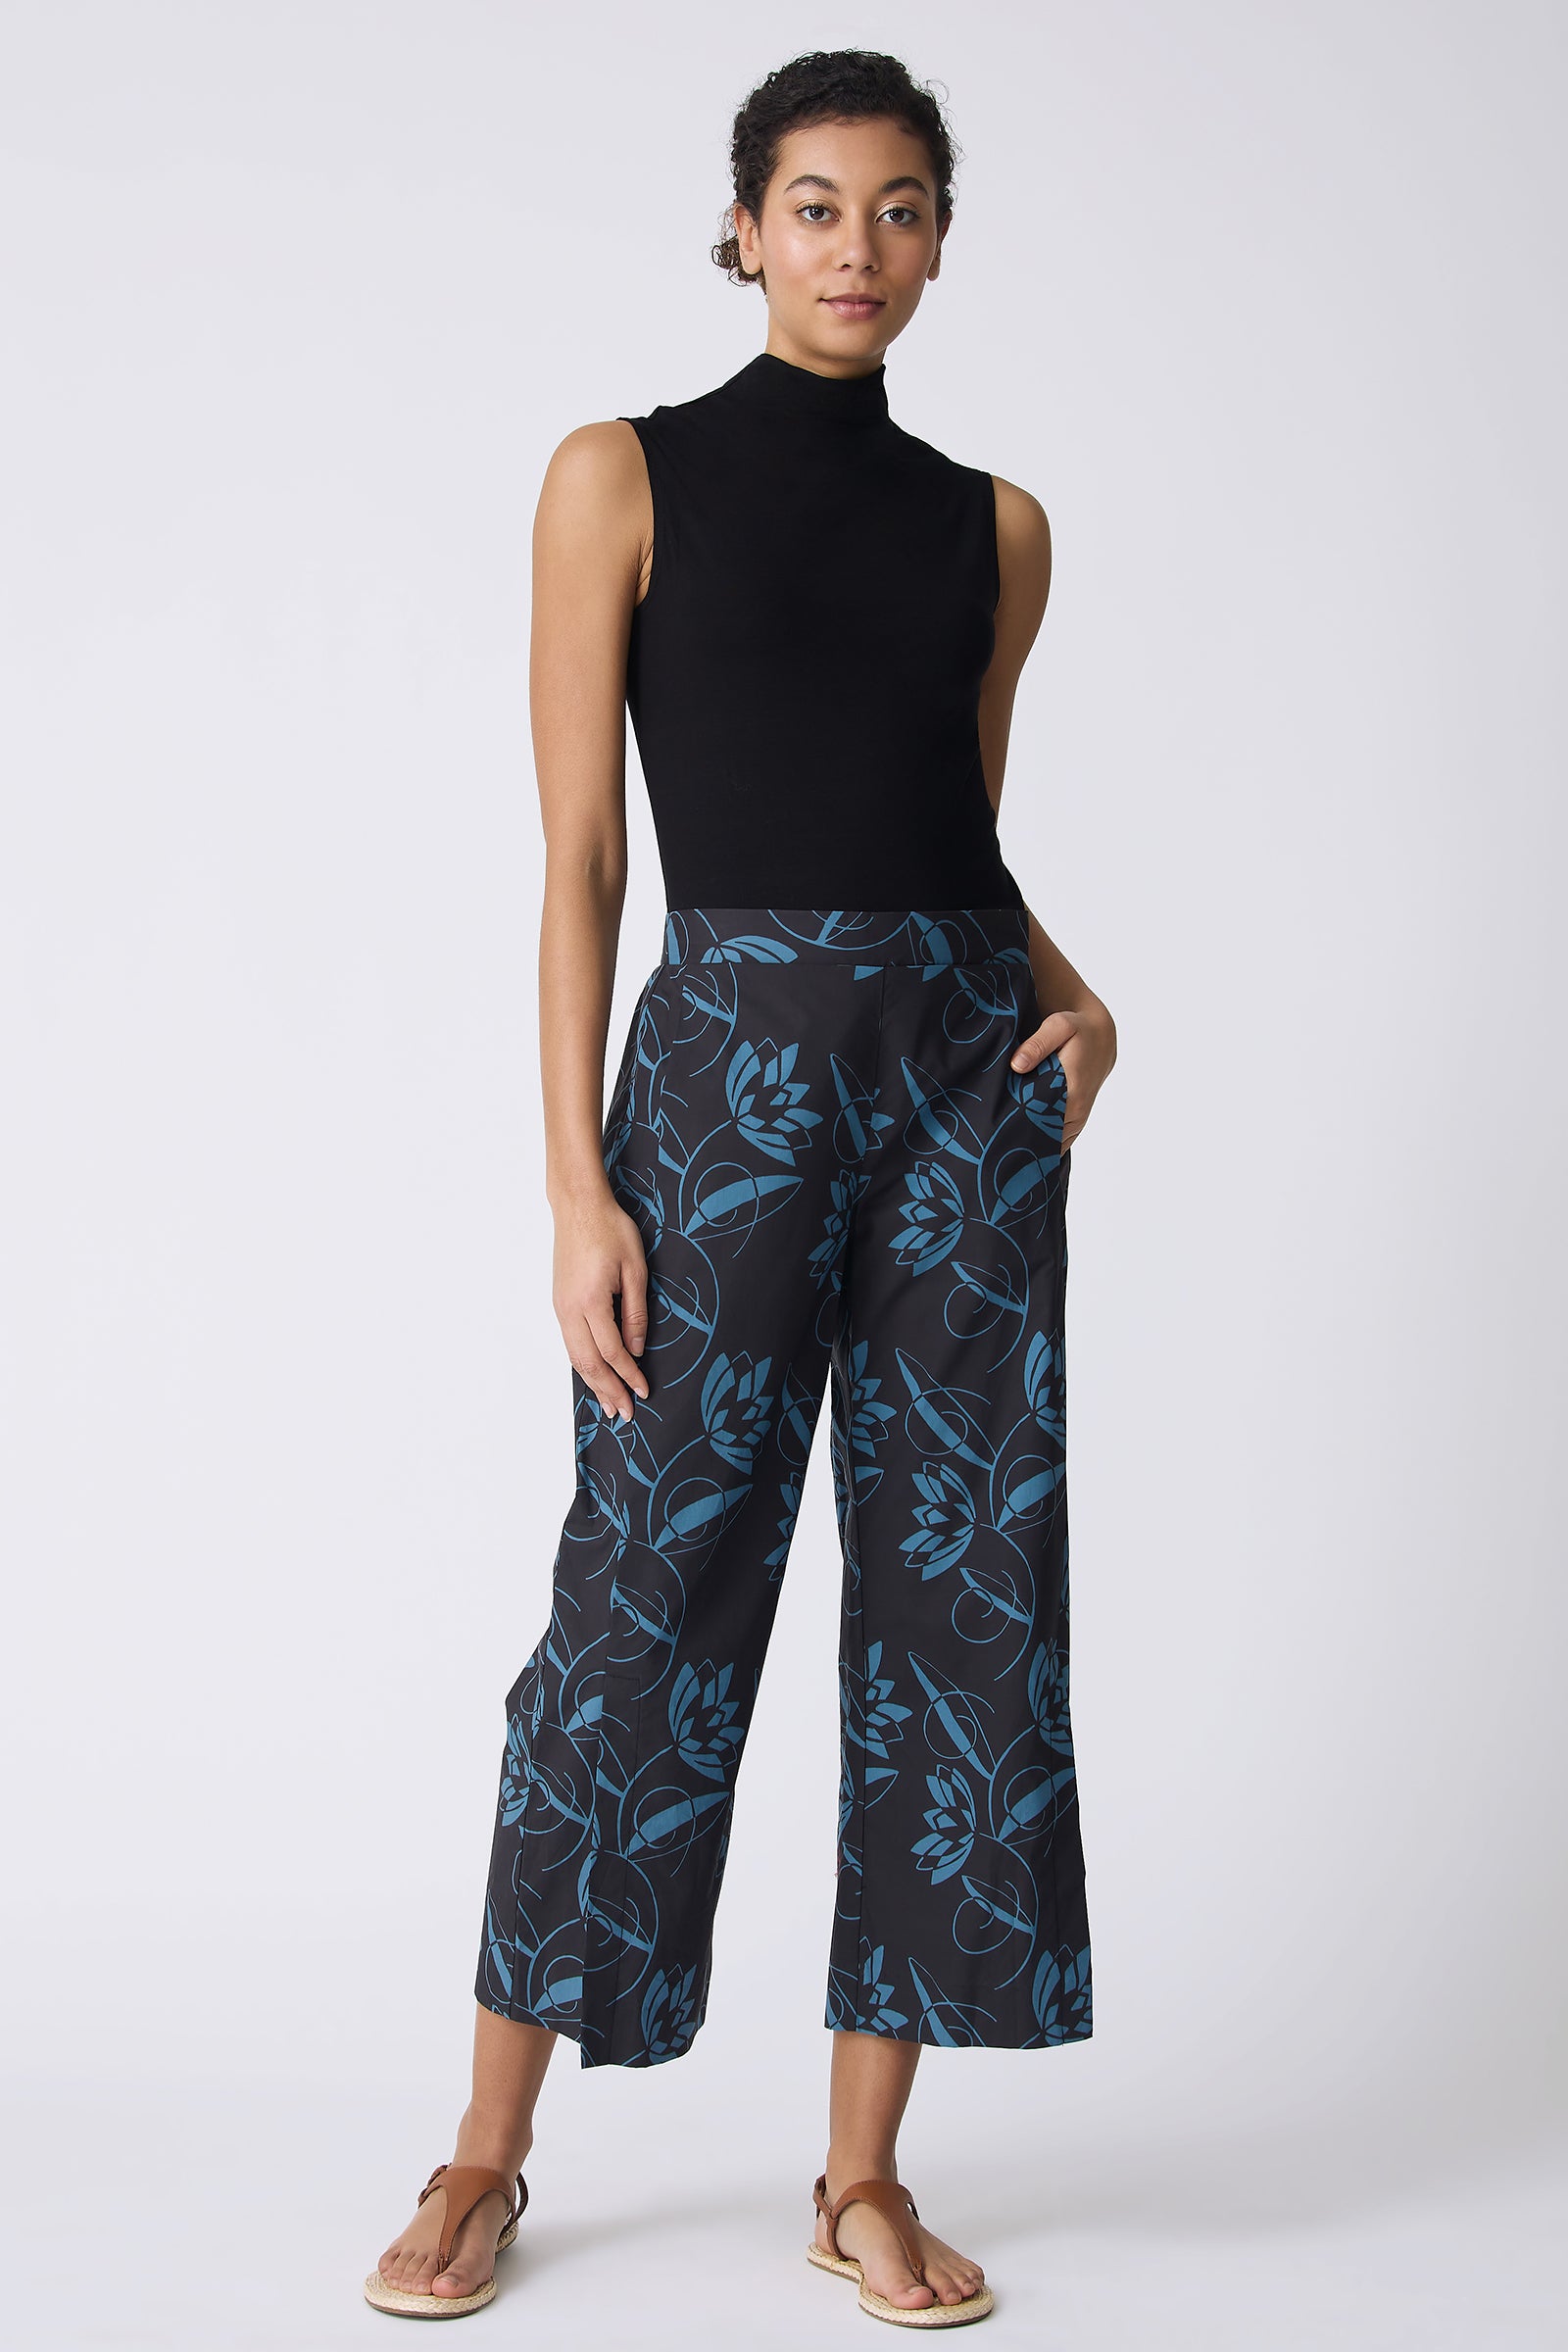 Kal Rieman Tami Side Kick Pant in Lotus Print Blue on model with left hand in pocket